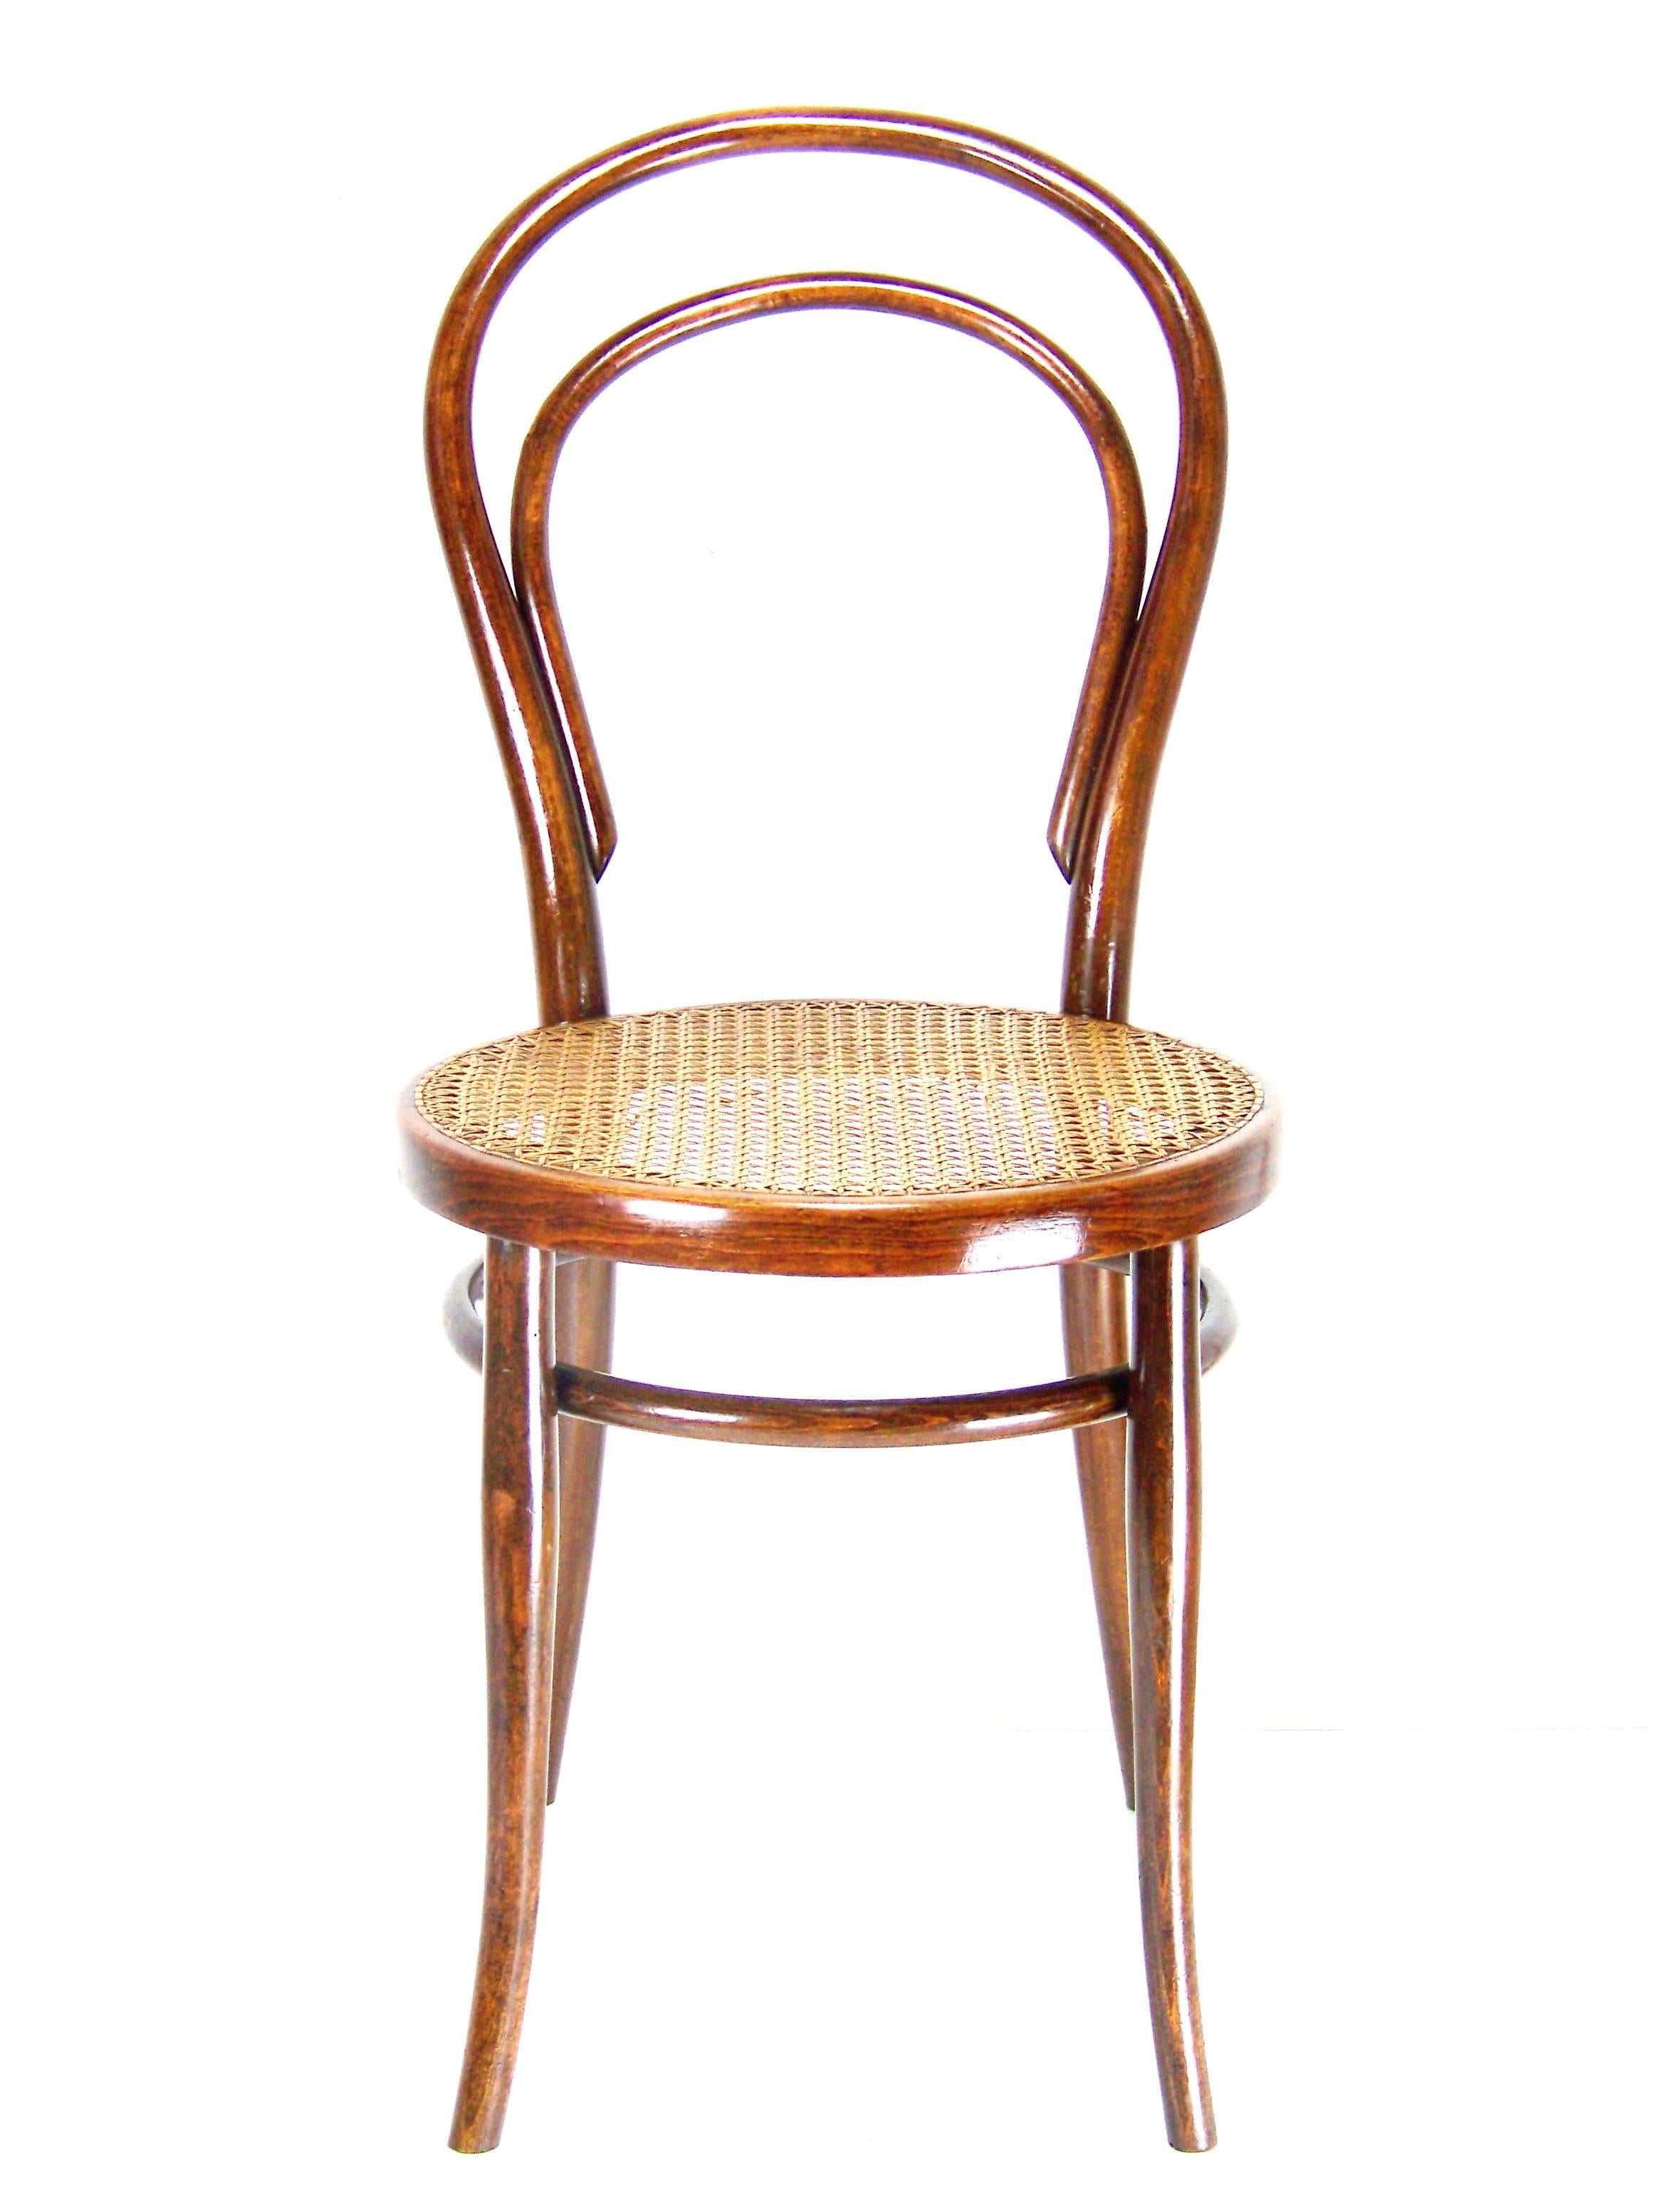 Manufactured in Austria by the Gebrüder Thonet Company. Marked with stamp and paper label under the seat. Chair was cleaned and gentle re-polished with shellack finish.